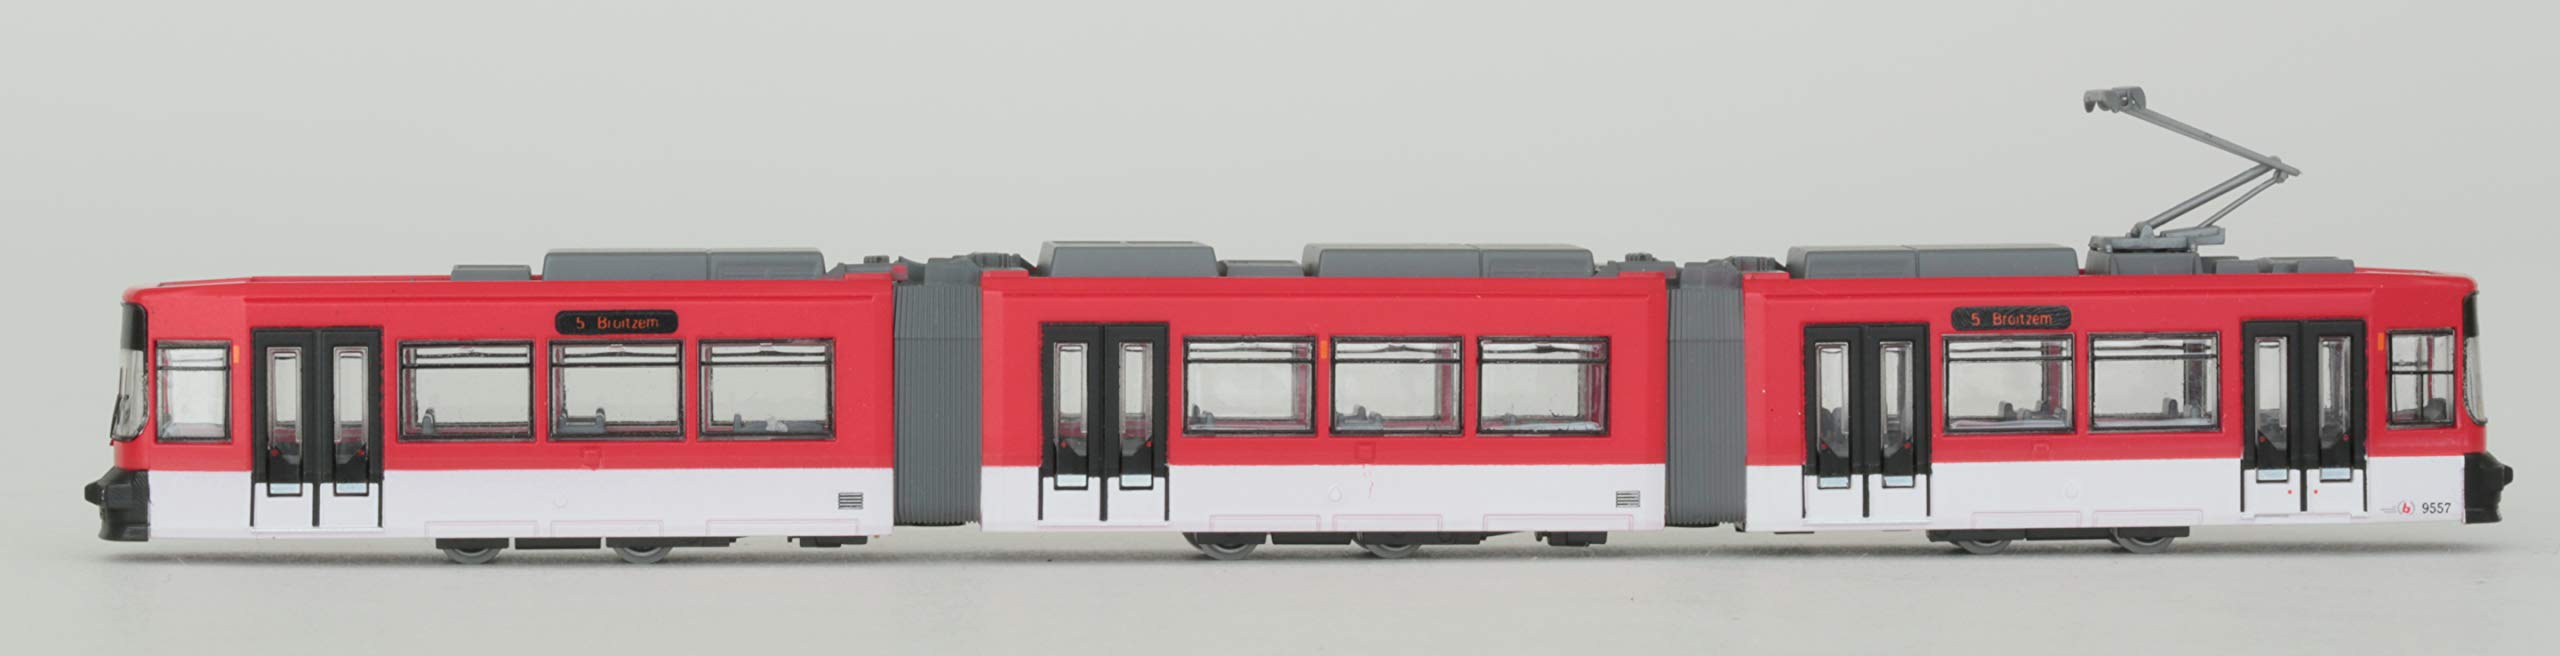 Tomytec Eisenbahnmodell - Gt6S Typ Iron Collection Braunschweigtrum Limited Edition